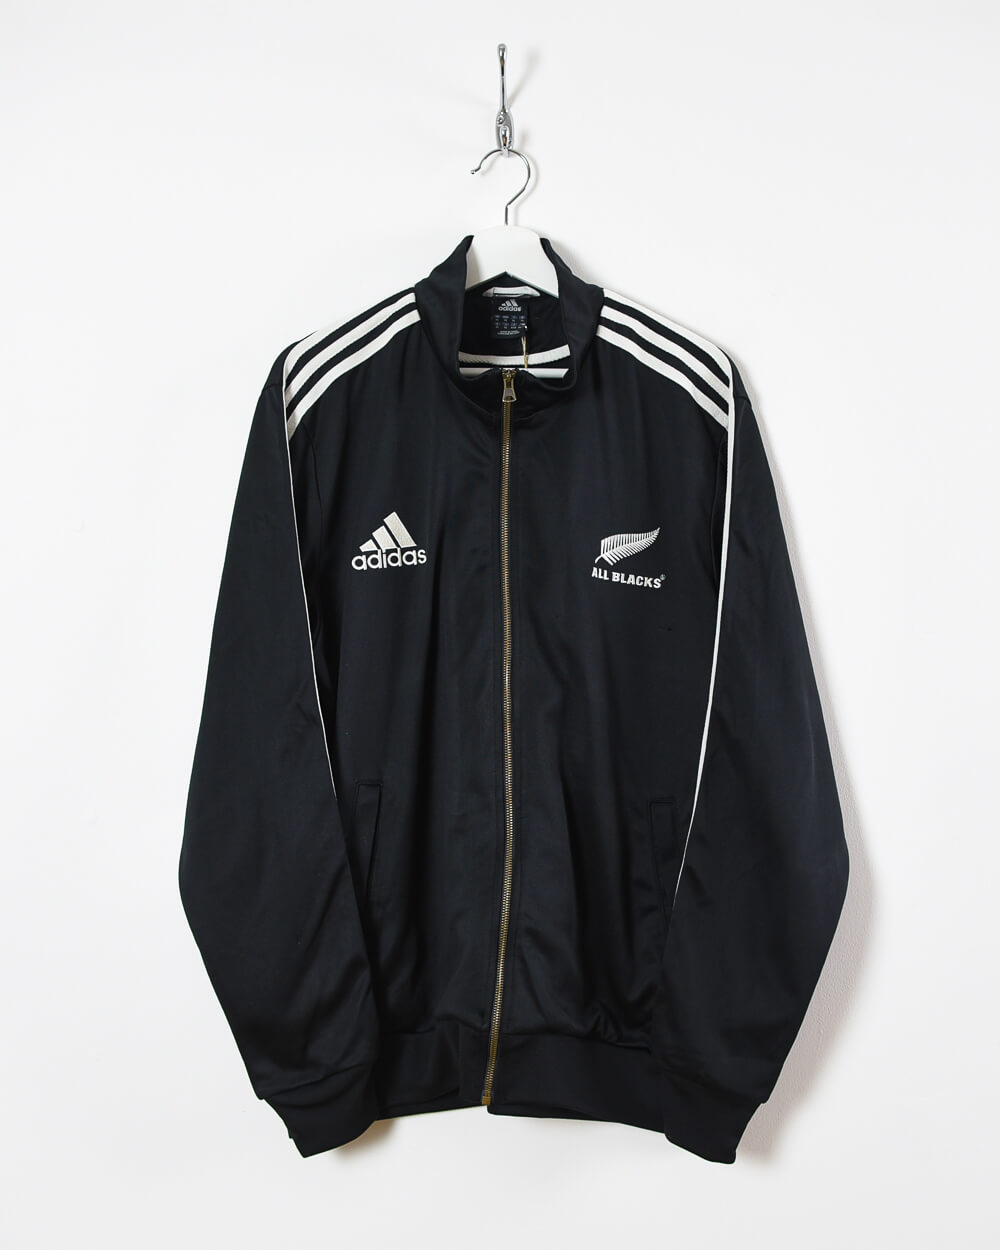 Adidas New Zealand All Blacks Tracksuit Top - Large - Domno Vintage 90s, 80s, 00s Retro and Vintage Clothing 